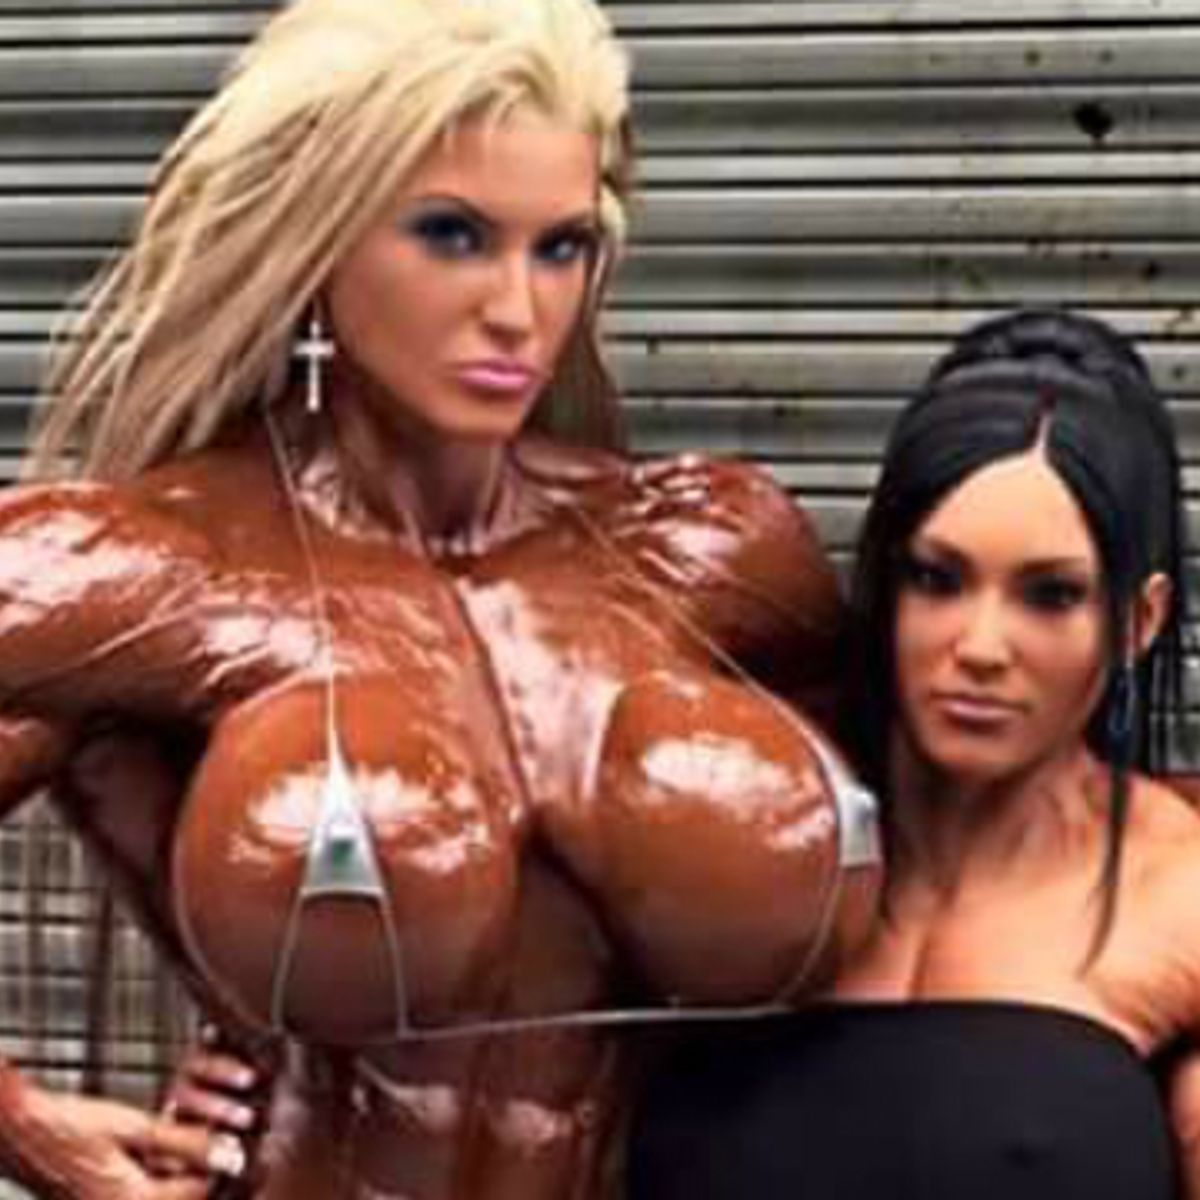 alexander basa recommends Big Breasted Female Bodybuilders